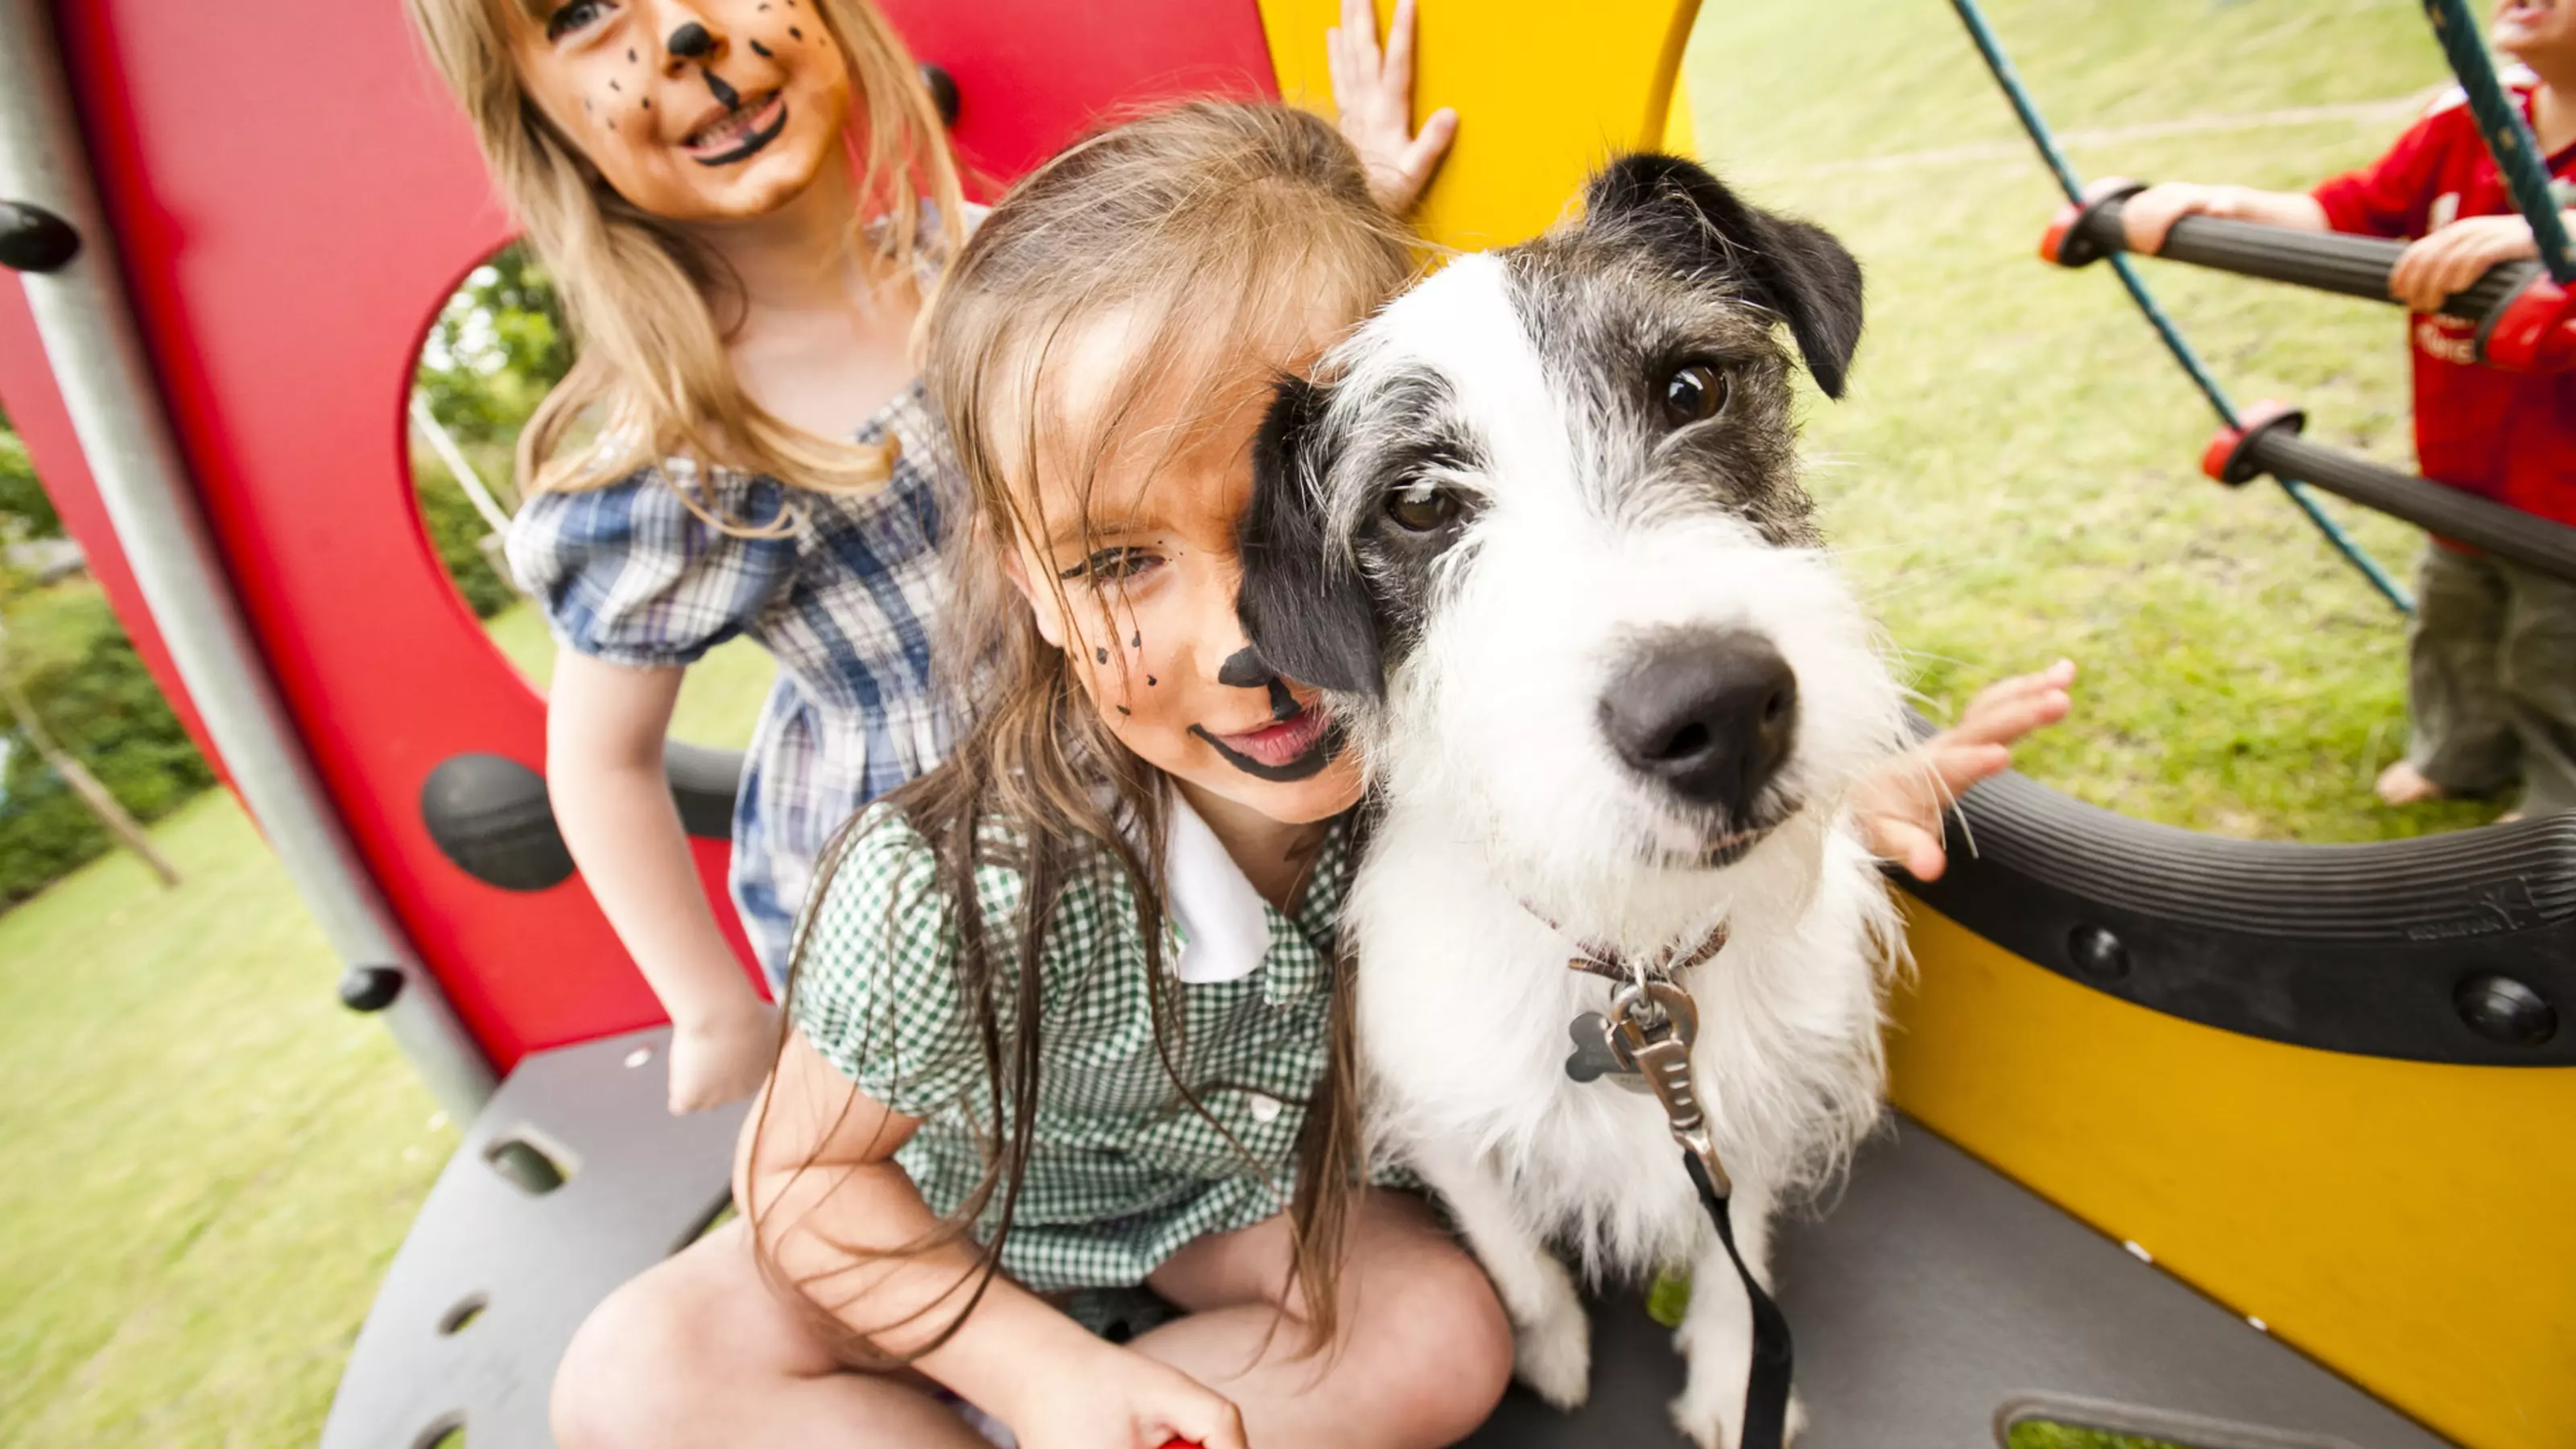 Jack russell looking into camera with two children with facepaint on behind them